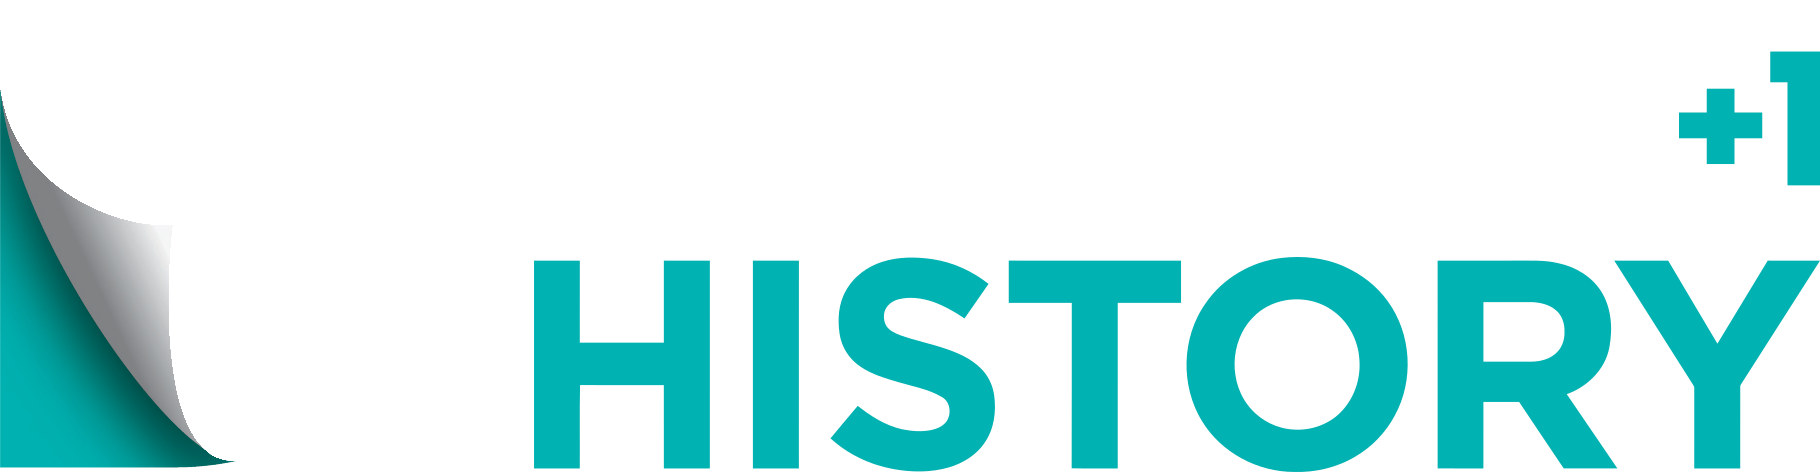 Discovery History Plus 1 vector Logo